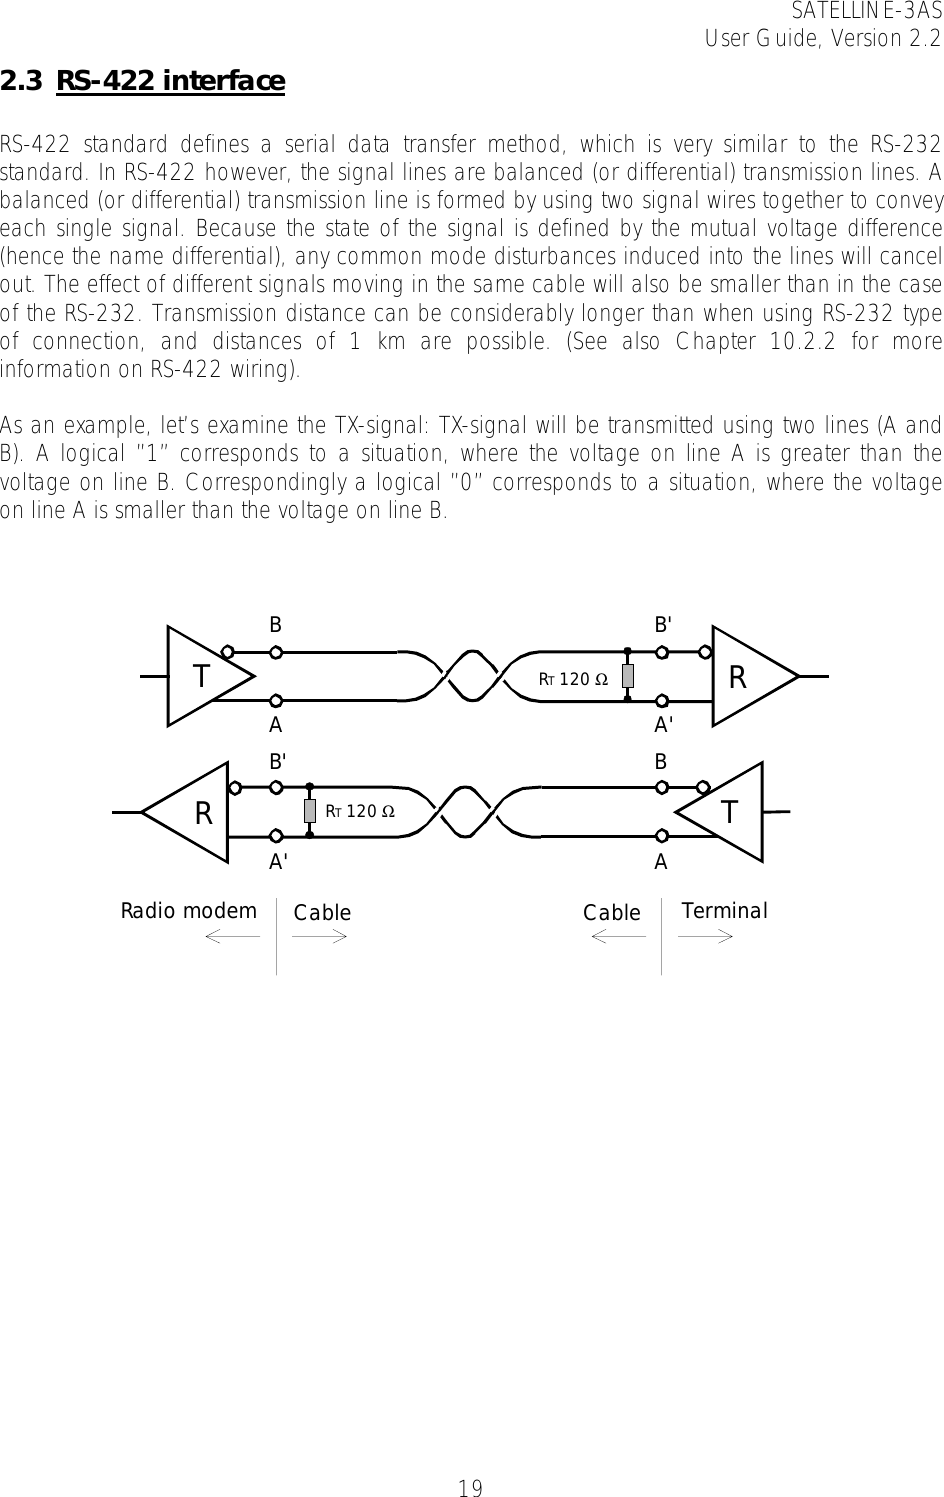 SATELLINE-3AS User Guide, Version 2.2   192.3 RS-422 interface  RS-422 standard defines a serial data transfer method, which is very similar to the RS-232 standard. In RS-422 however, the signal lines are balanced (or differential) transmission lines. A balanced (or differential) transmission line is formed by using two signal wires together to convey each single signal. Because the state of the signal is defined by the mutual voltage difference (hence the name differential), any common mode disturbances induced into the lines will cancel out. The effect of different signals moving in the same cable will also be smaller than in the case of the RS-232. Transmission distance can be considerably longer than when using RS-232 type of connection, and distances of 1 km are possible. (See also Chapter 10.2.2 for more information on RS-422 wiring).  As an example, let’s examine the TX-signal: TX-signal will be transmitted using two lines (A and B). A logical ”1” corresponds to a situation, where the voltage on line A is greater than the voltage on line B. Correspondingly a logical ”0” corresponds to a situation, where the voltage on line A is smaller than the voltage on line B.  RT 120 ΩRTRT 120 ΩRTBB&apos;AA&apos;B&apos; BA&apos; ARadio modem Cable TerminalCable